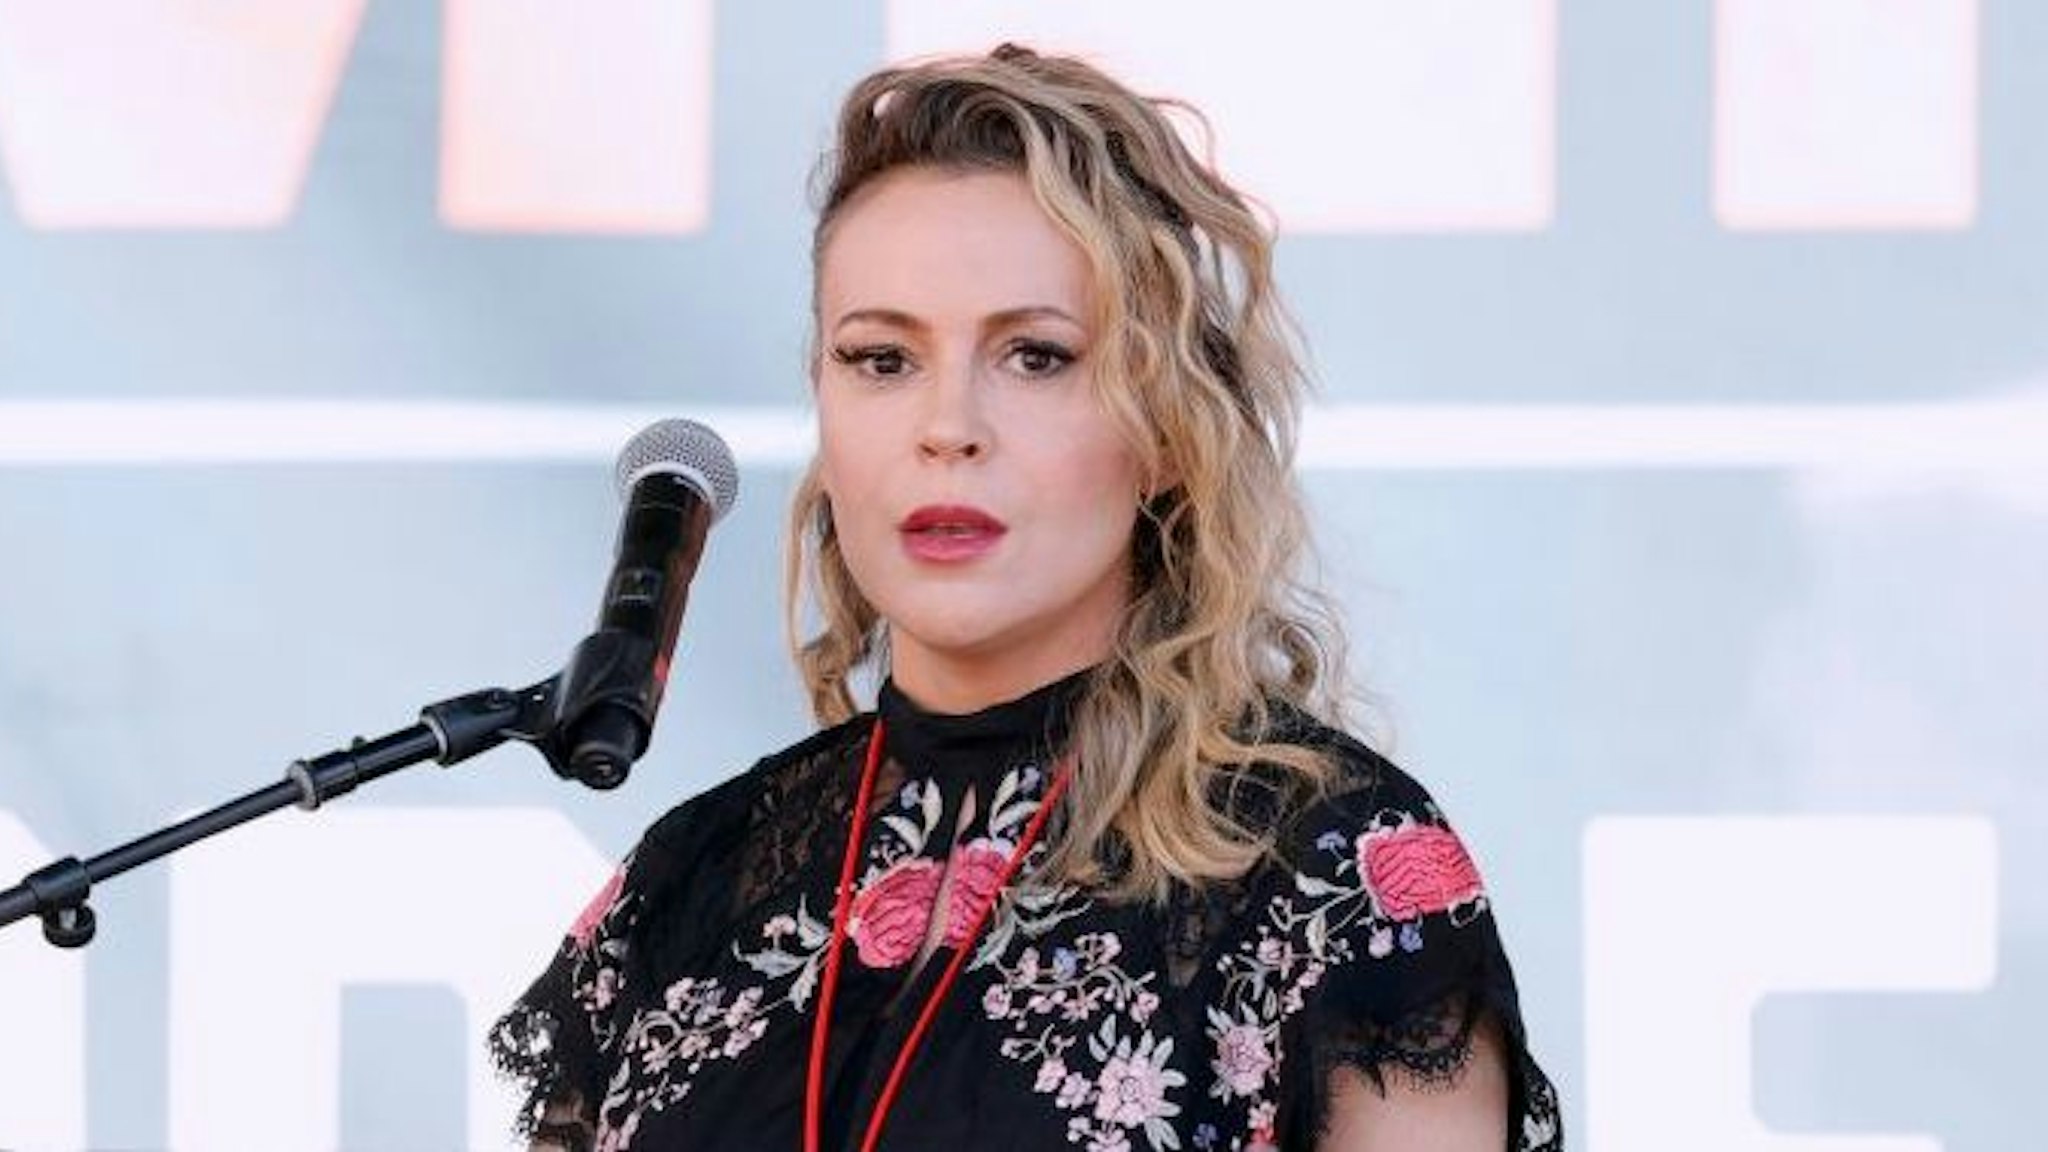 Alyssa Milano attends Women's March Action: March 4 Reproductive Rights at Pershing Square on October 02, 2021 in Los Angeles, California.